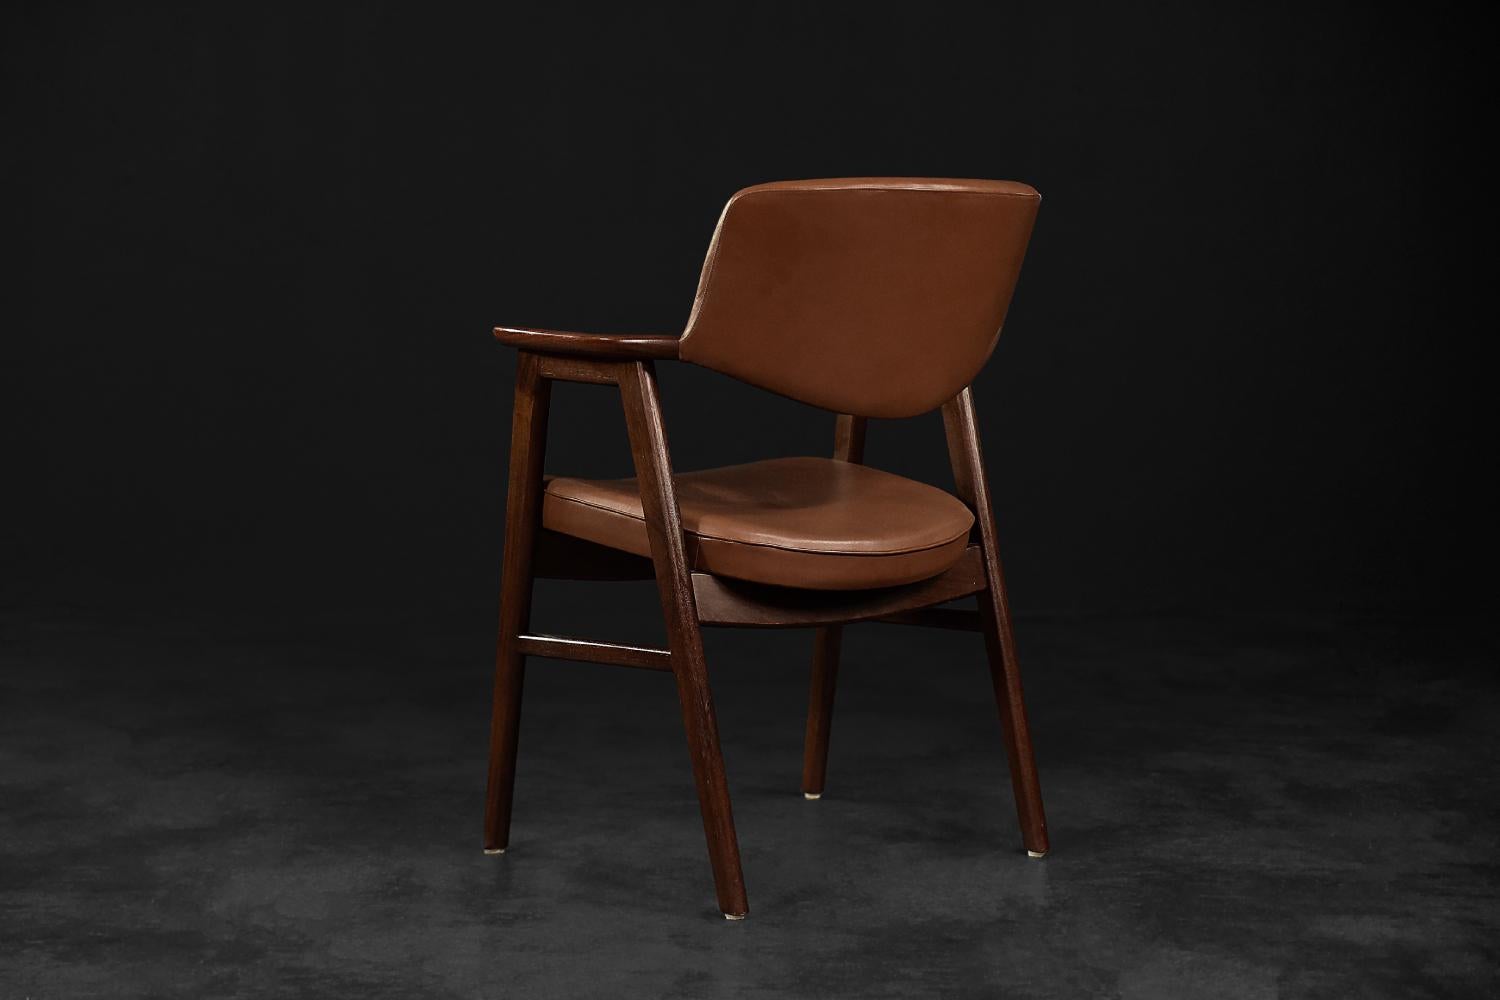 Mid-20th Century Vintage Midcentury Danish Modern Rosewood Executive Chair No.43 by E. Kirkegaard